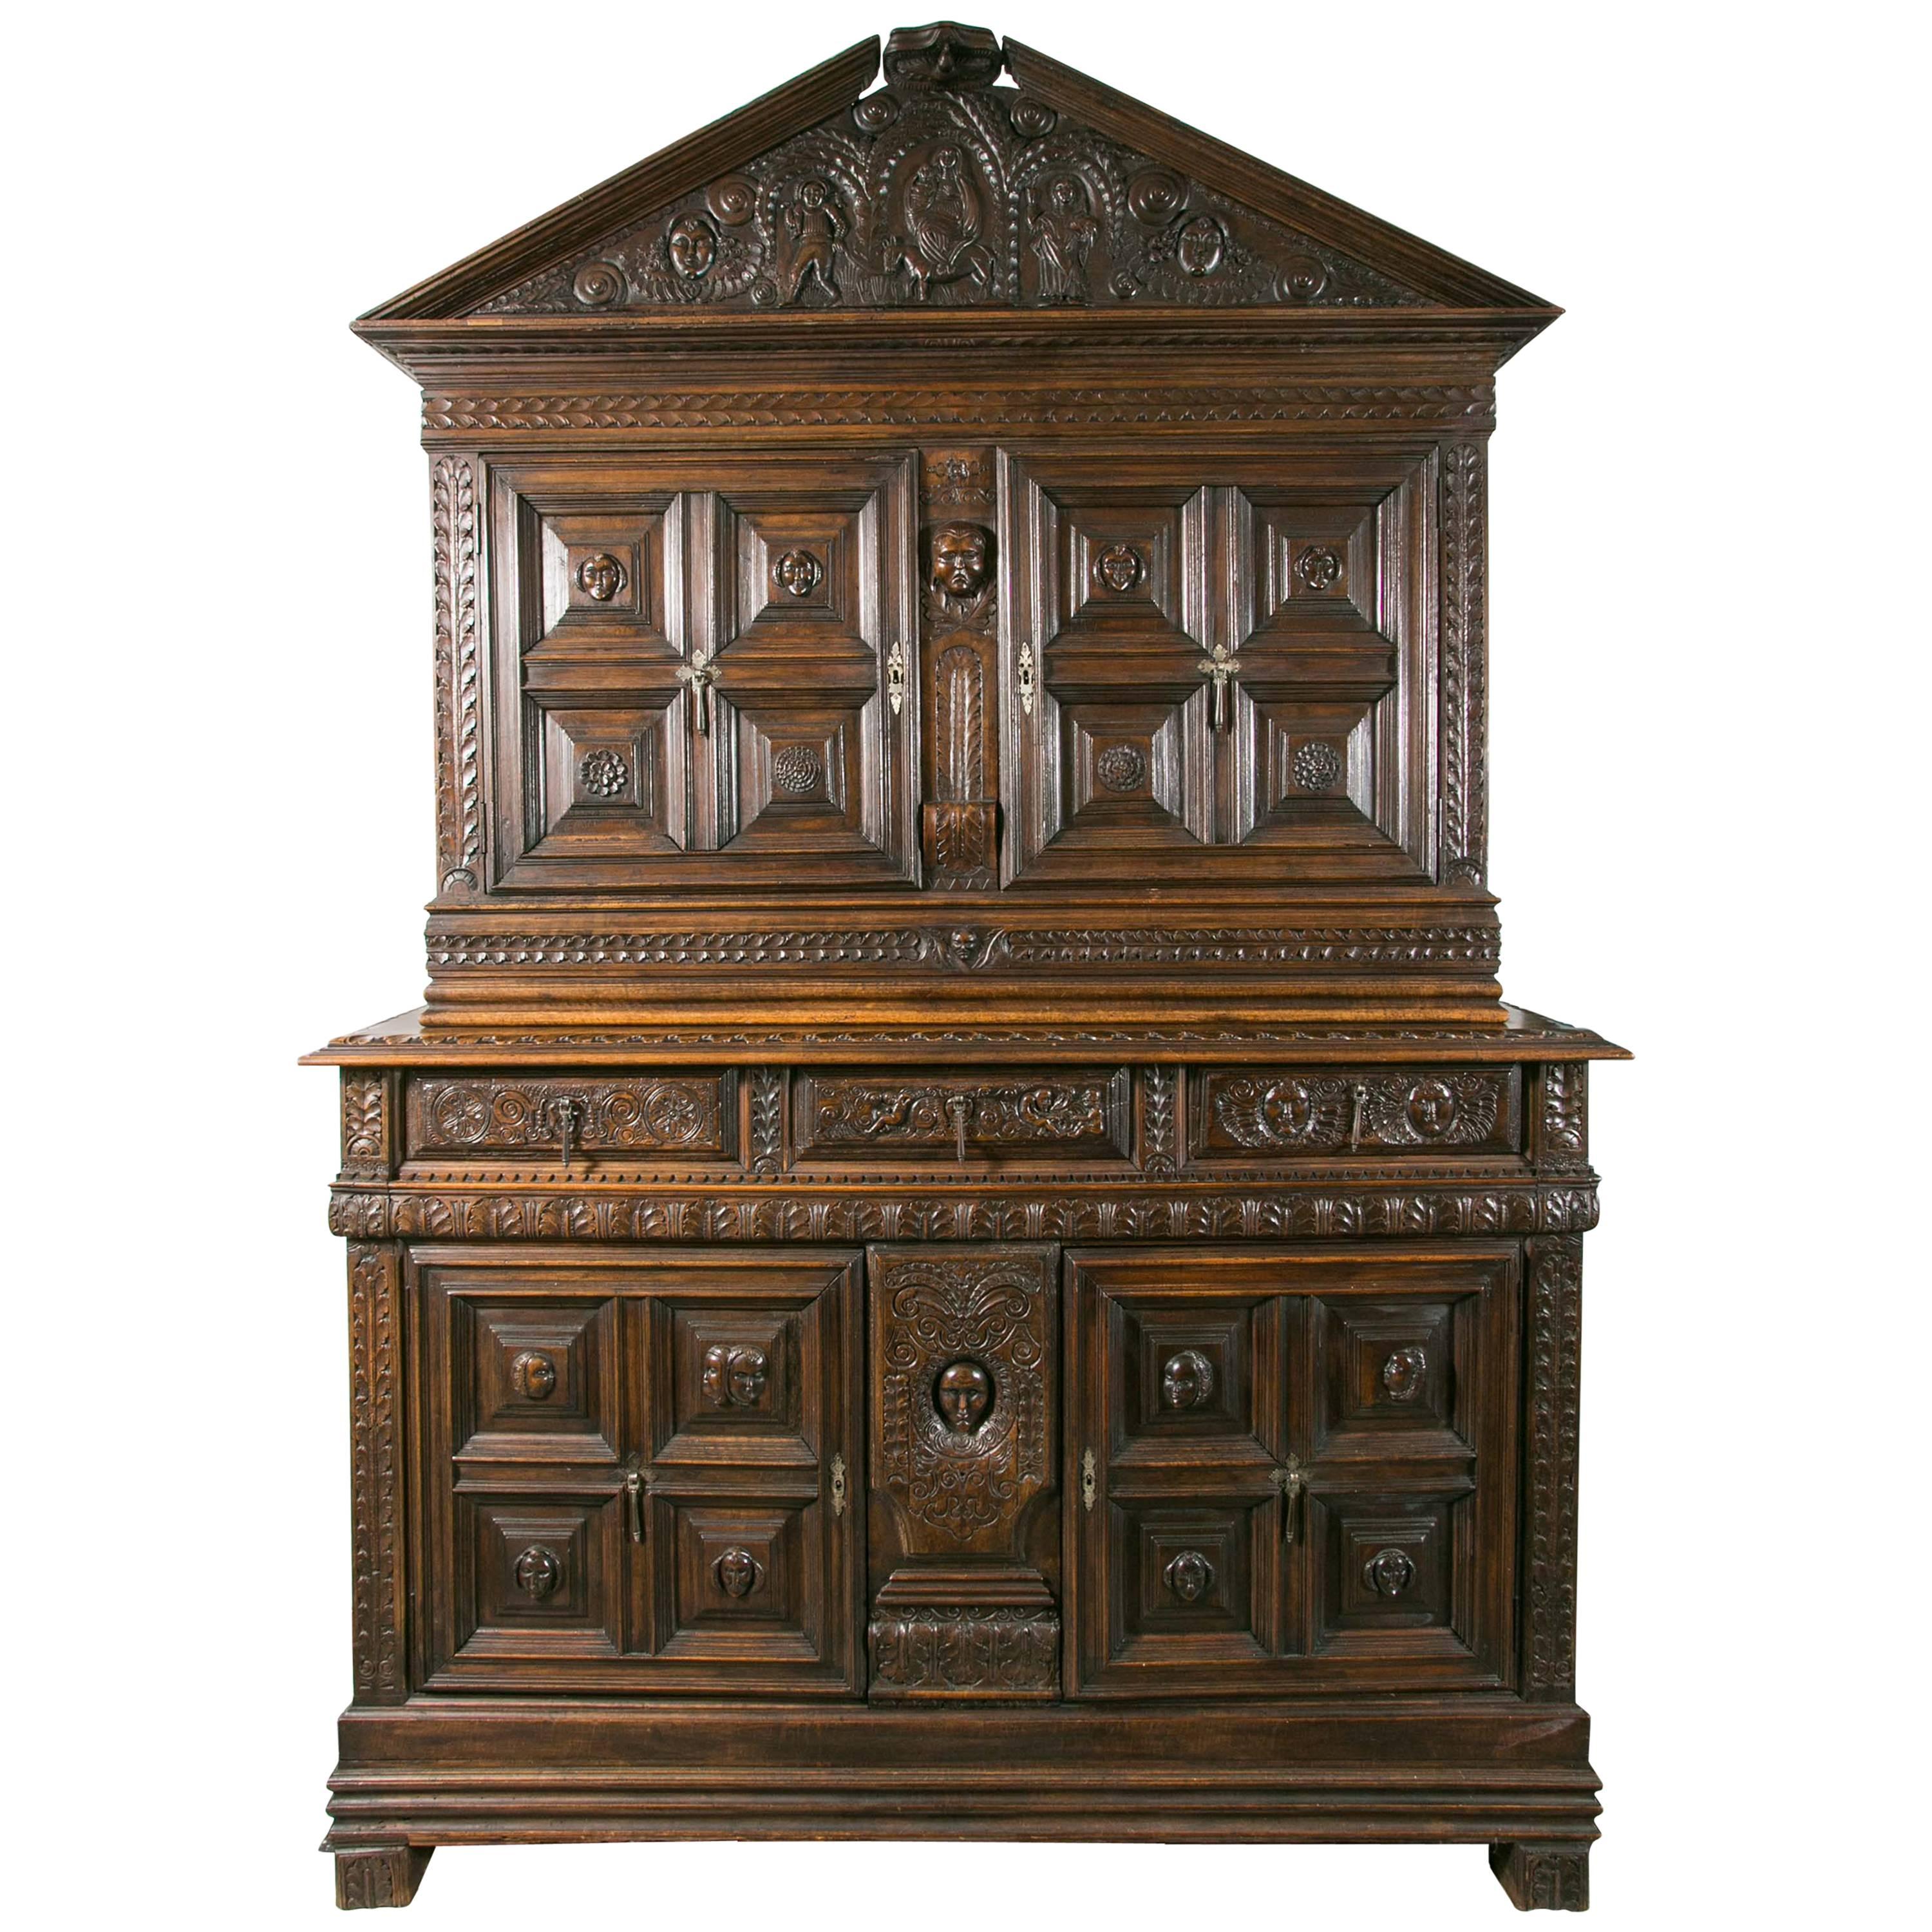 17th Century Furniture Important Supposedly from Northern Italy